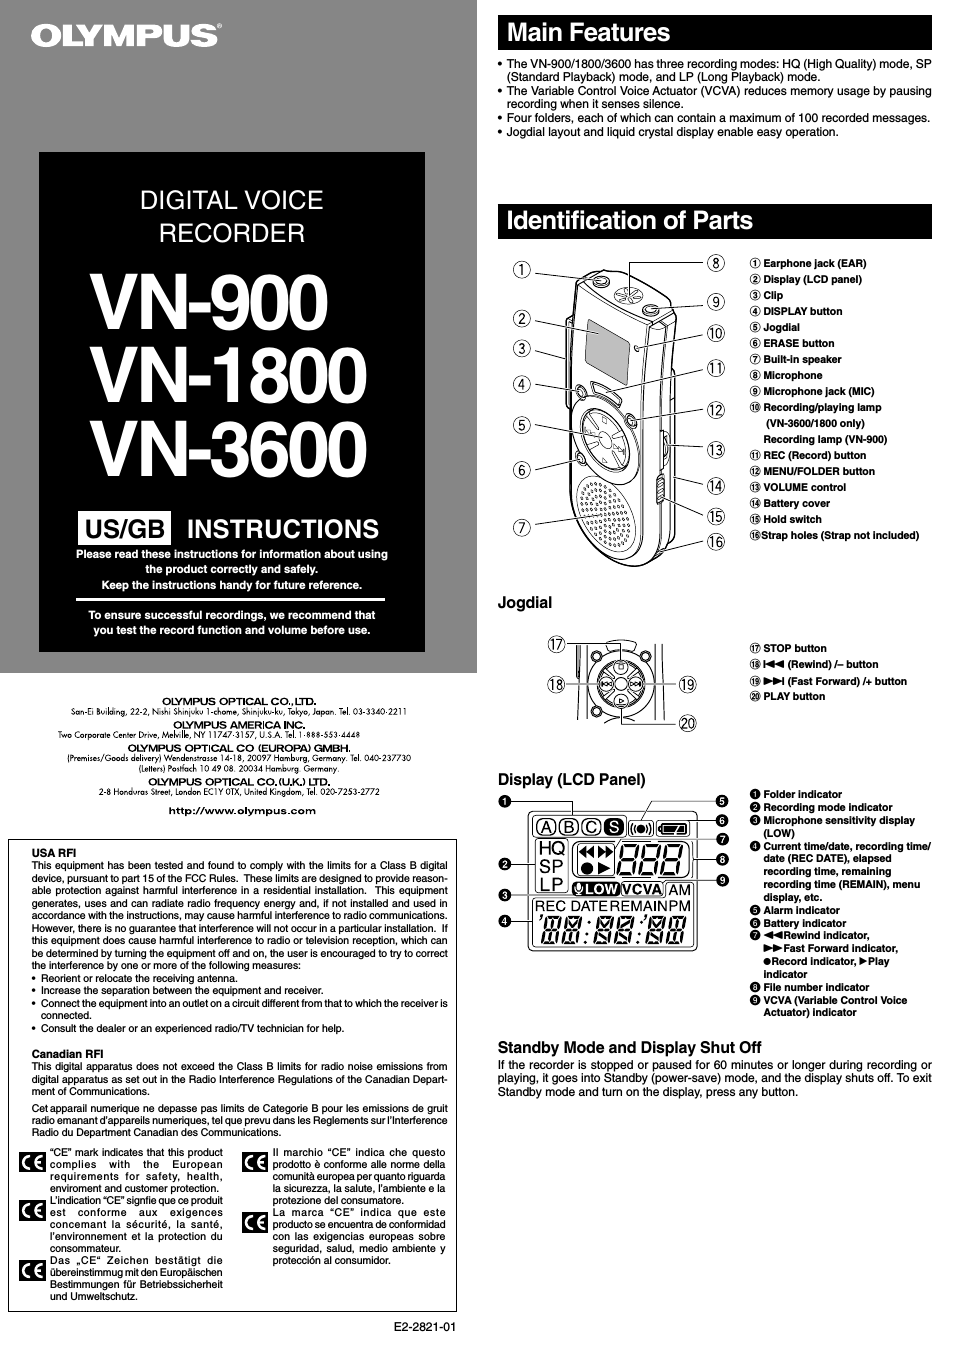 VN-900 US